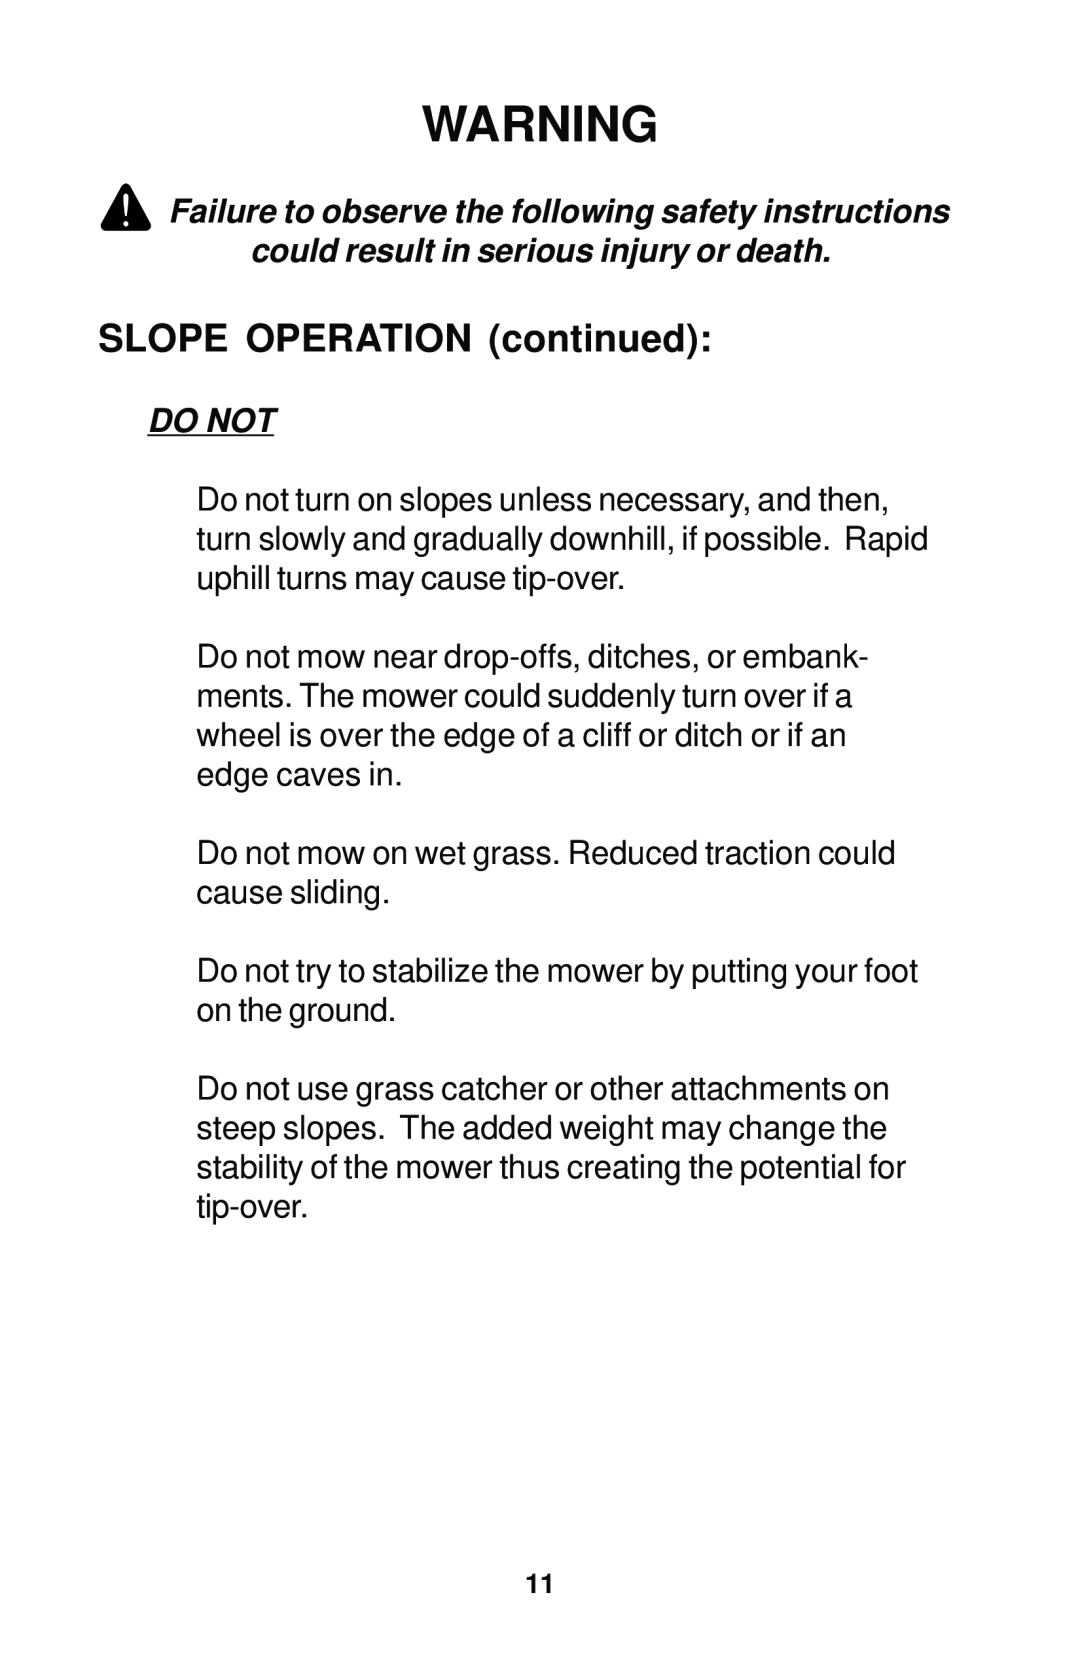 Dixon 17823-0704 manual SLOPE OPERATION continued, Do Not 